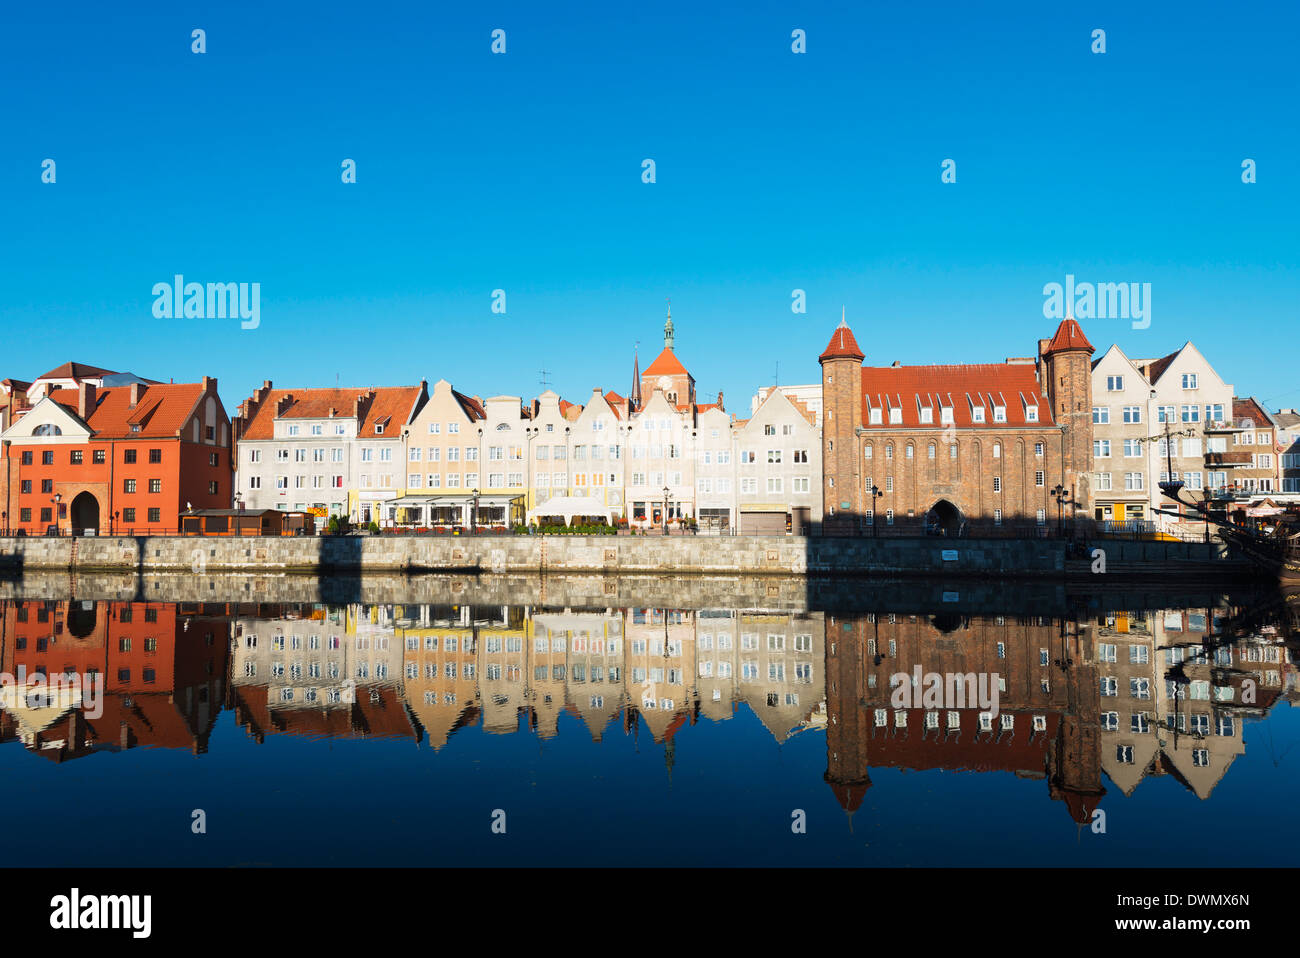 Canal side houses, Gdansk, Poland, Europe Stock Photo